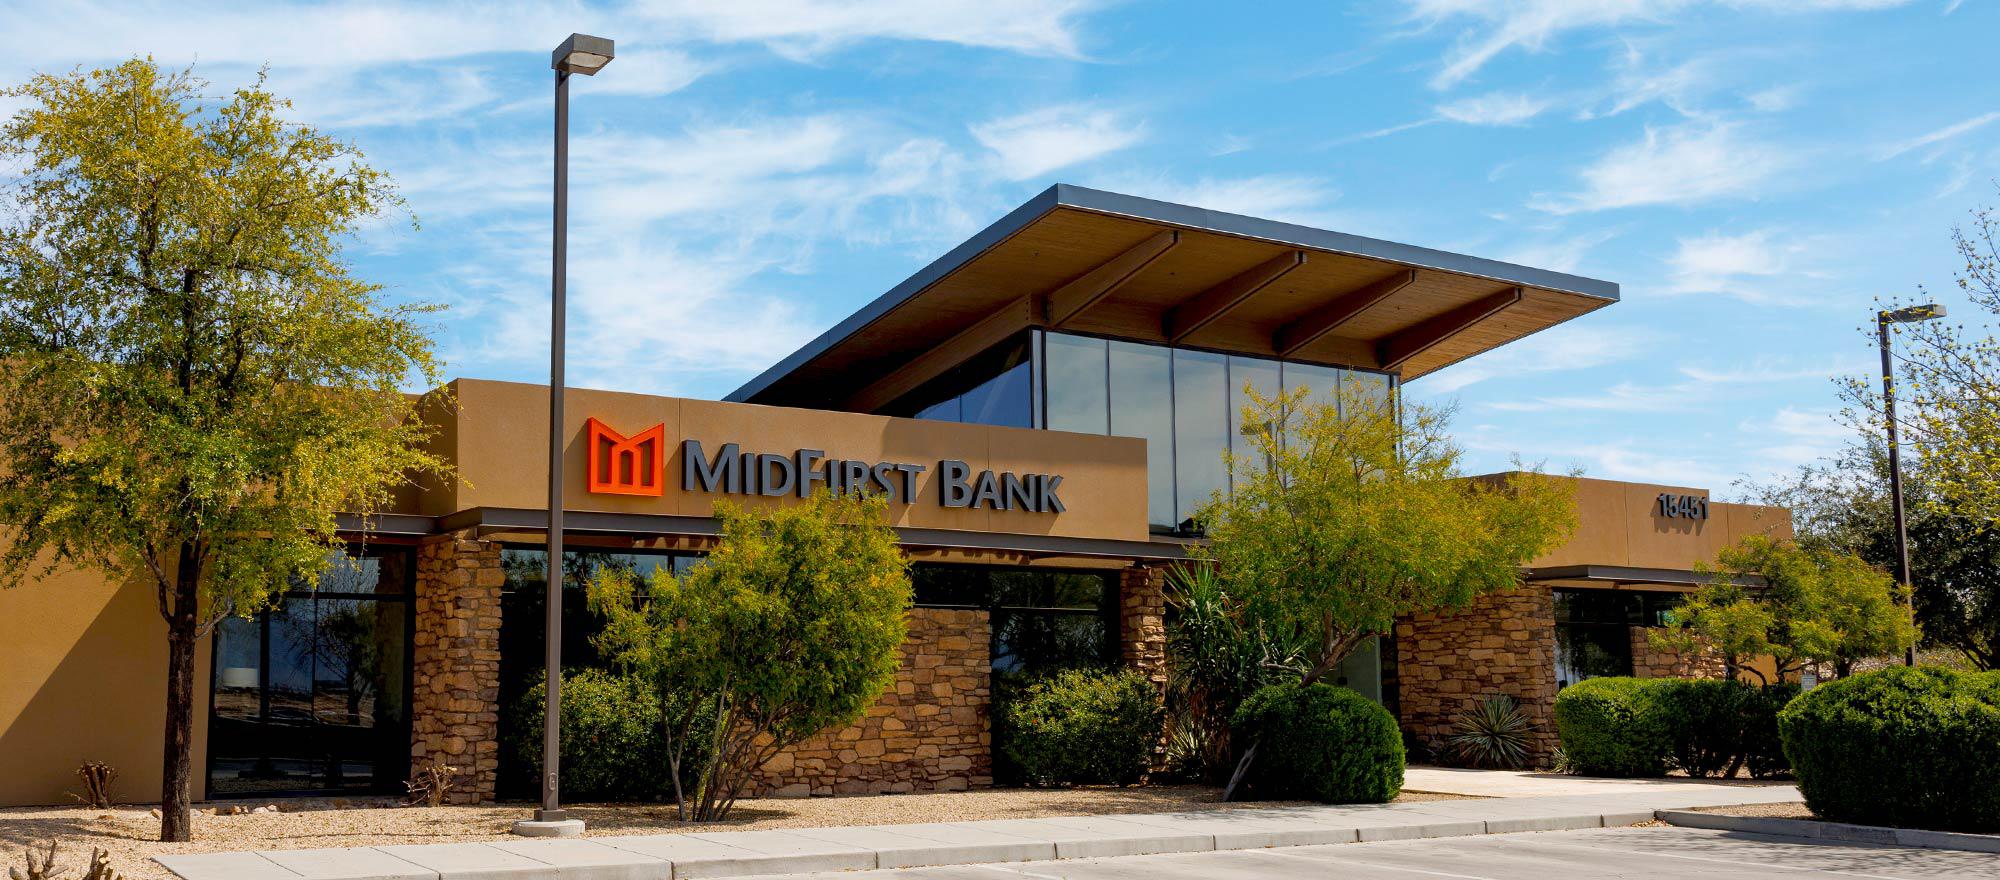 Exterior of MidFirst banking center location at Reems and Waddle in Surprise, Arizona.